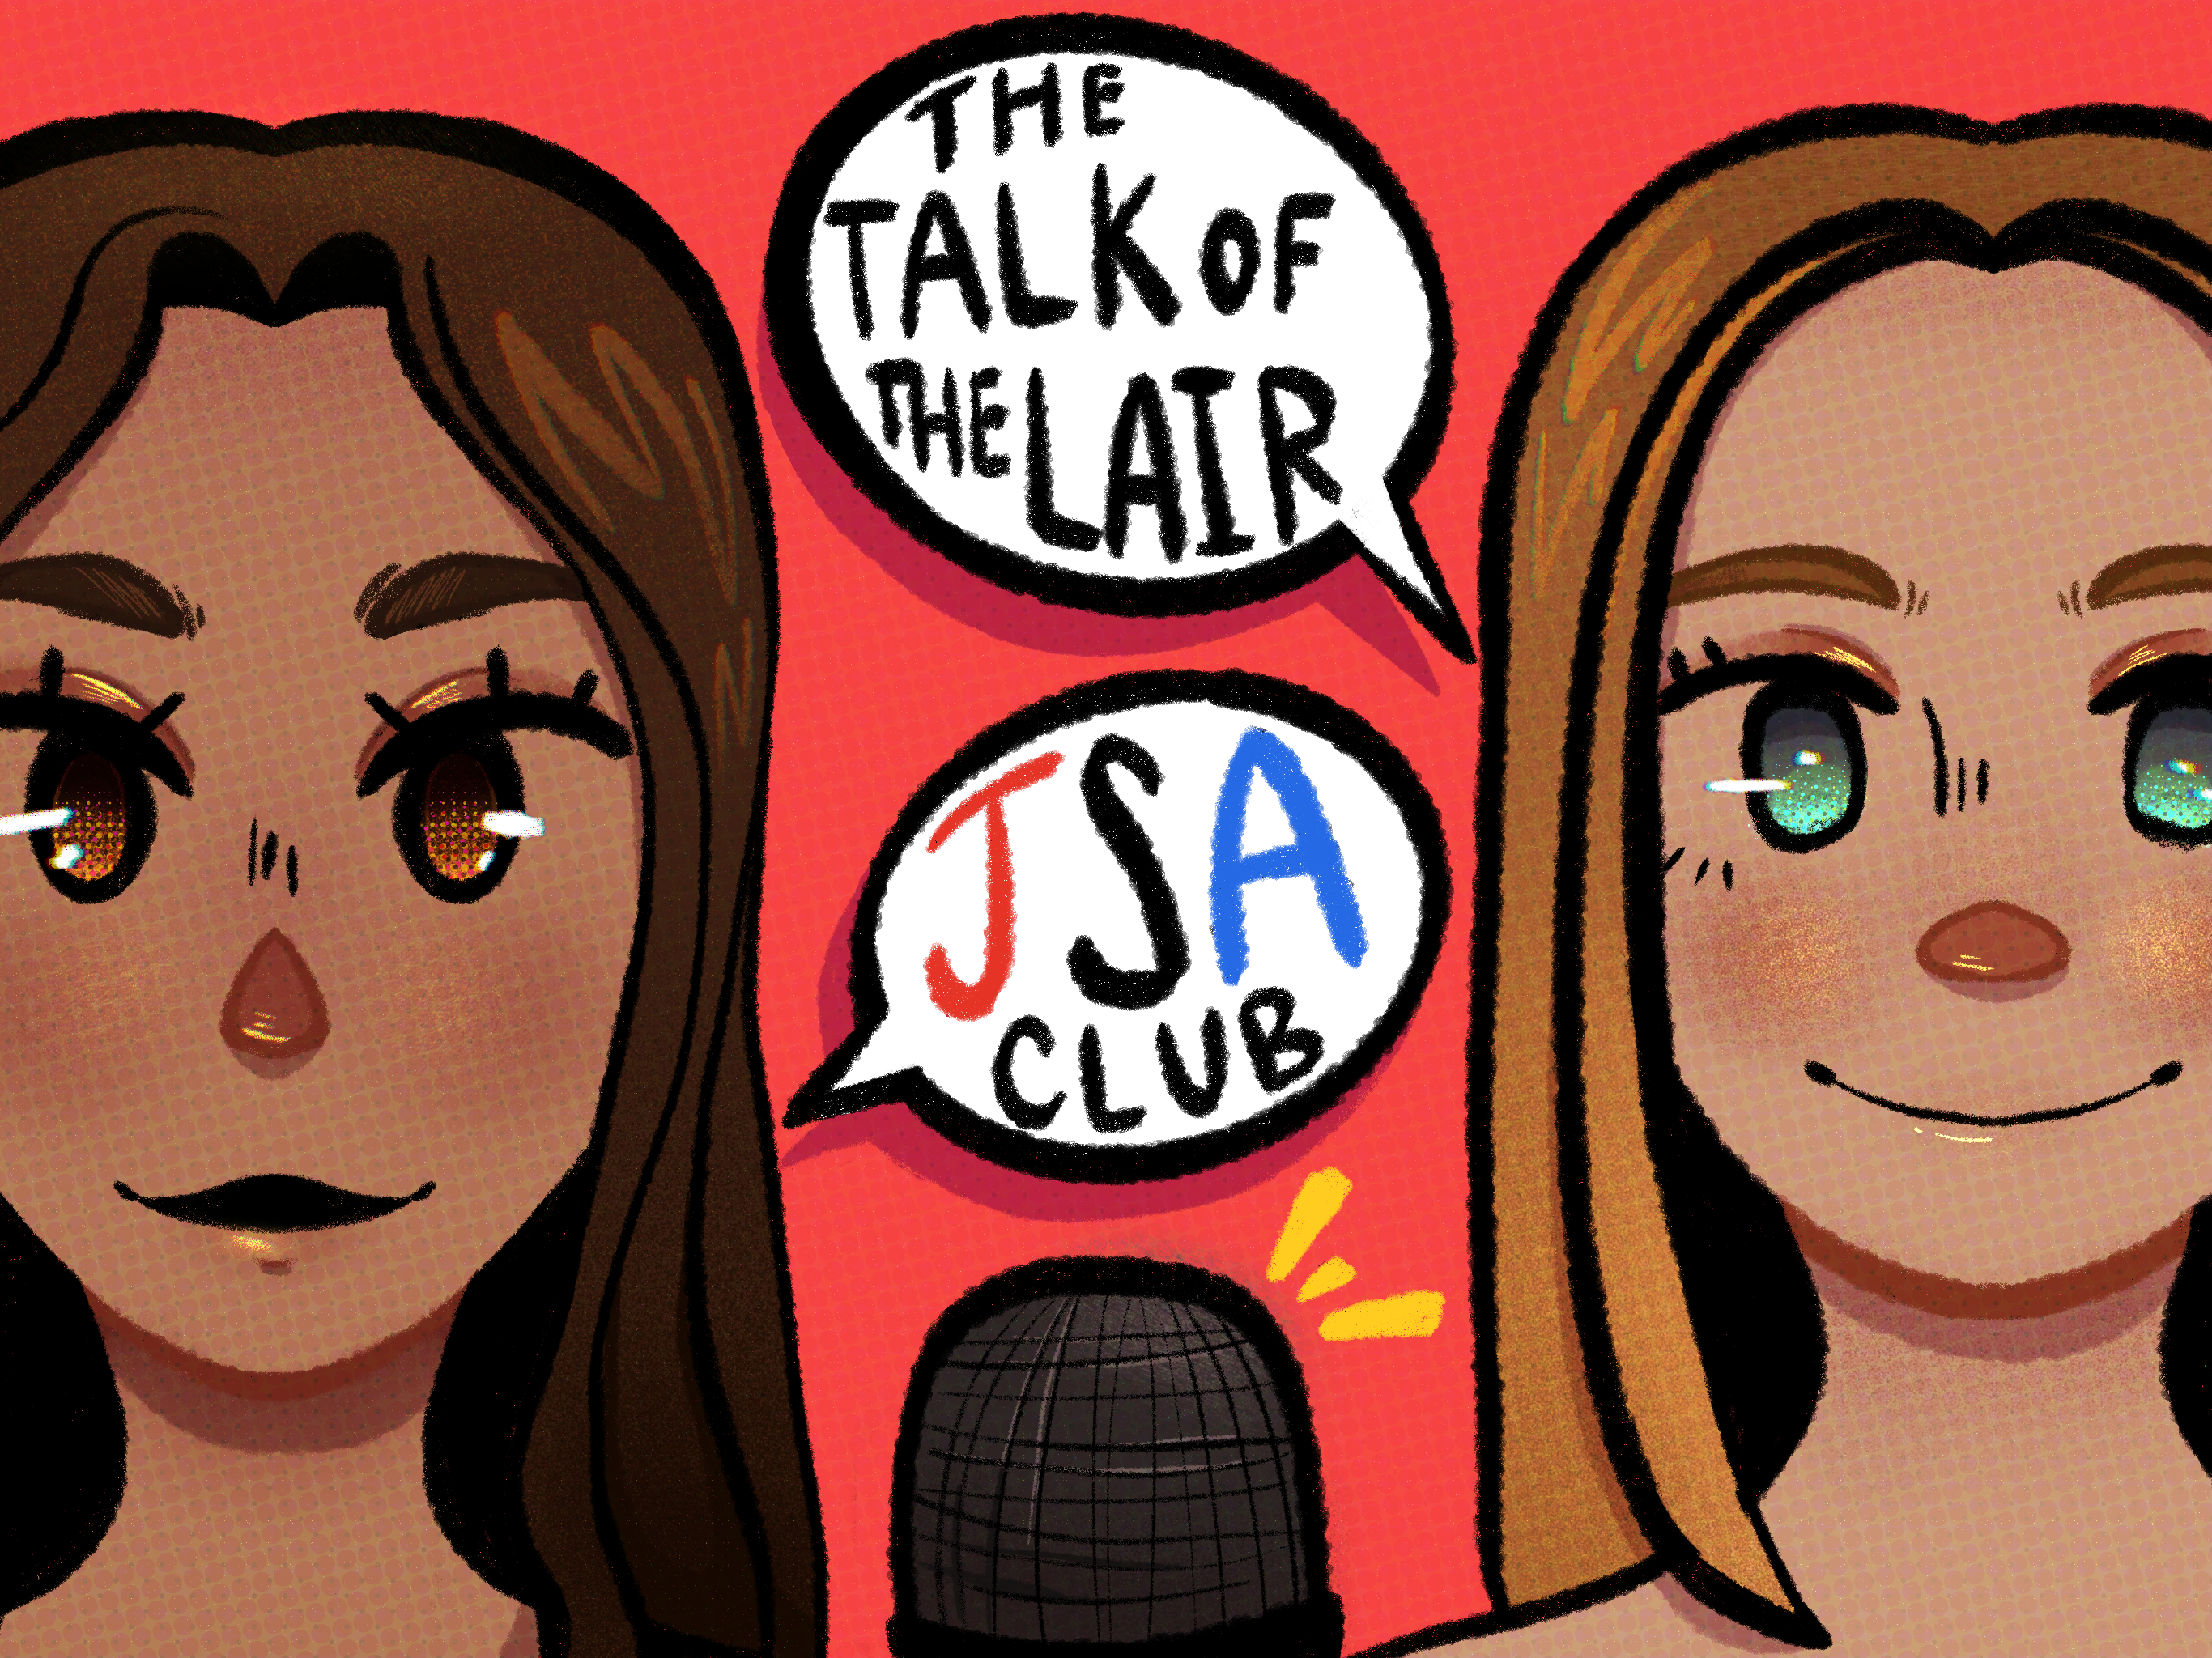 Join Foothill Dragon Press videographers Fiona Aulenta and Sofia Patiño in this new podcast entitled “The Talk of the Lair”. The first addition surrounds the Junior State of America Club, abbreviated to JSA Club. JSA is a student run organization designed to help high school students build leadership skills, encourage students to further their civic participation and grow their knowledge of our democratic system.